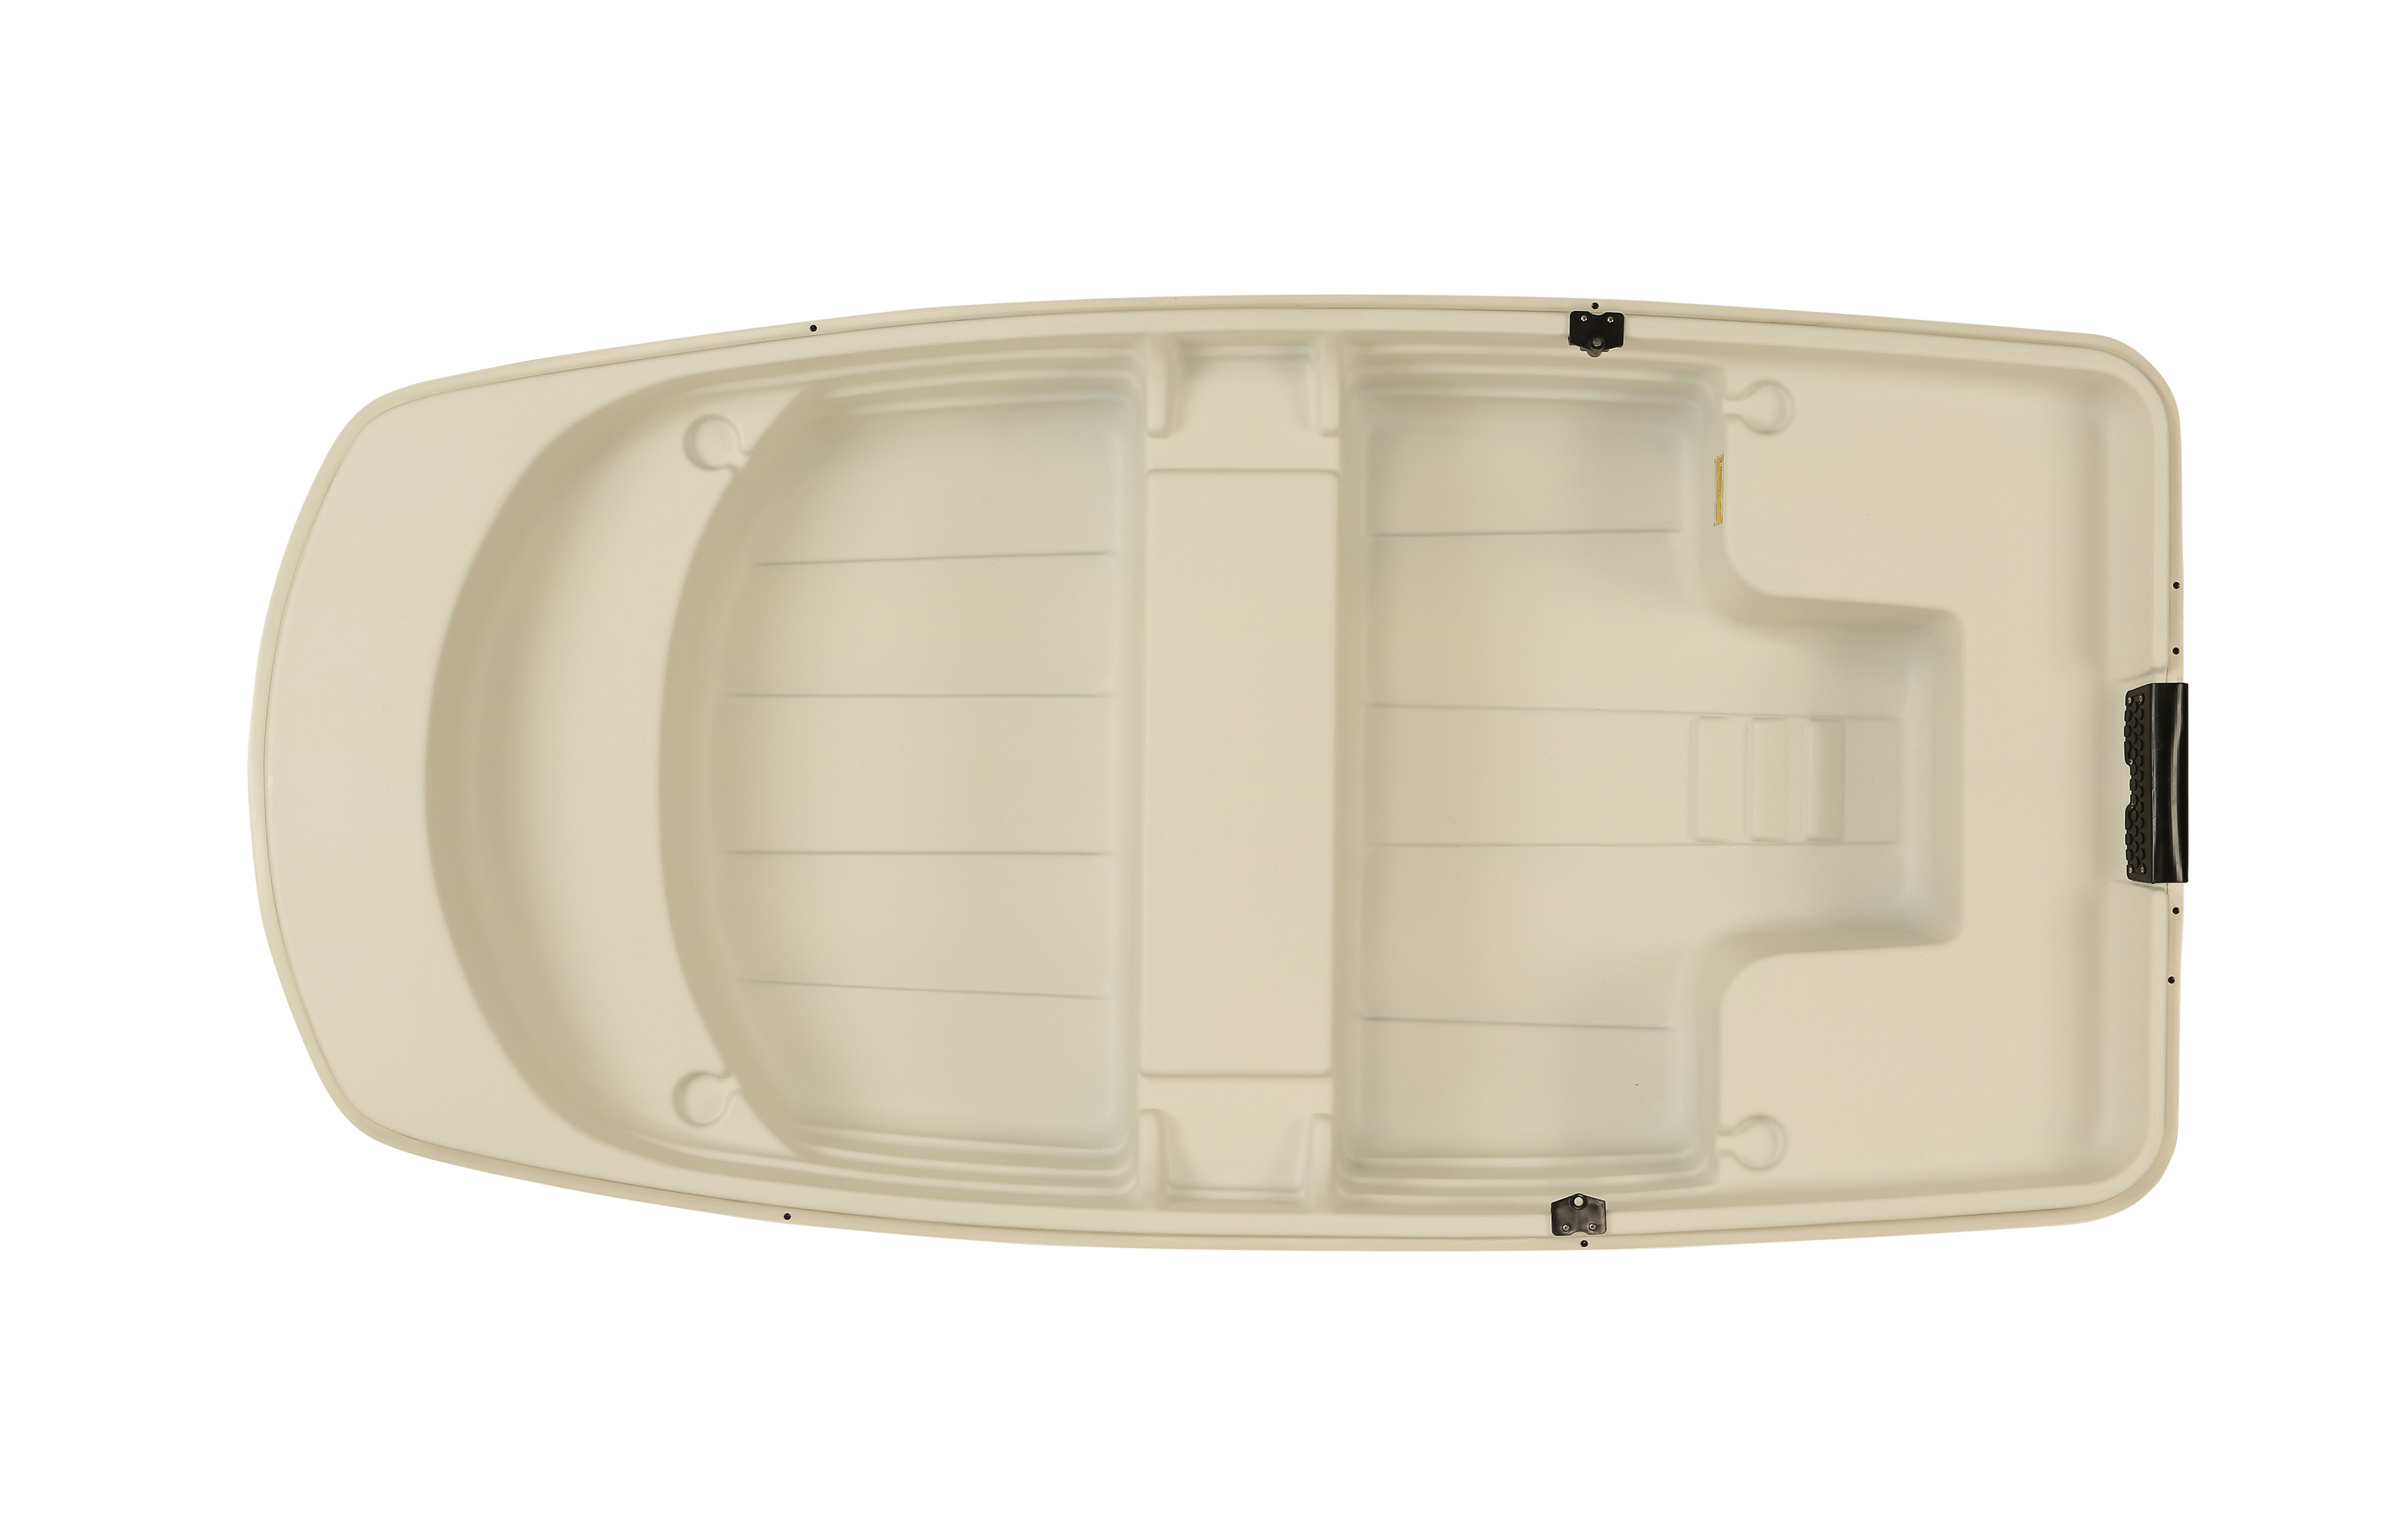 Sun Dolphin Water Tender 9.4' Dinghy Portable Row Boat, Cloud White - image 3 of 4